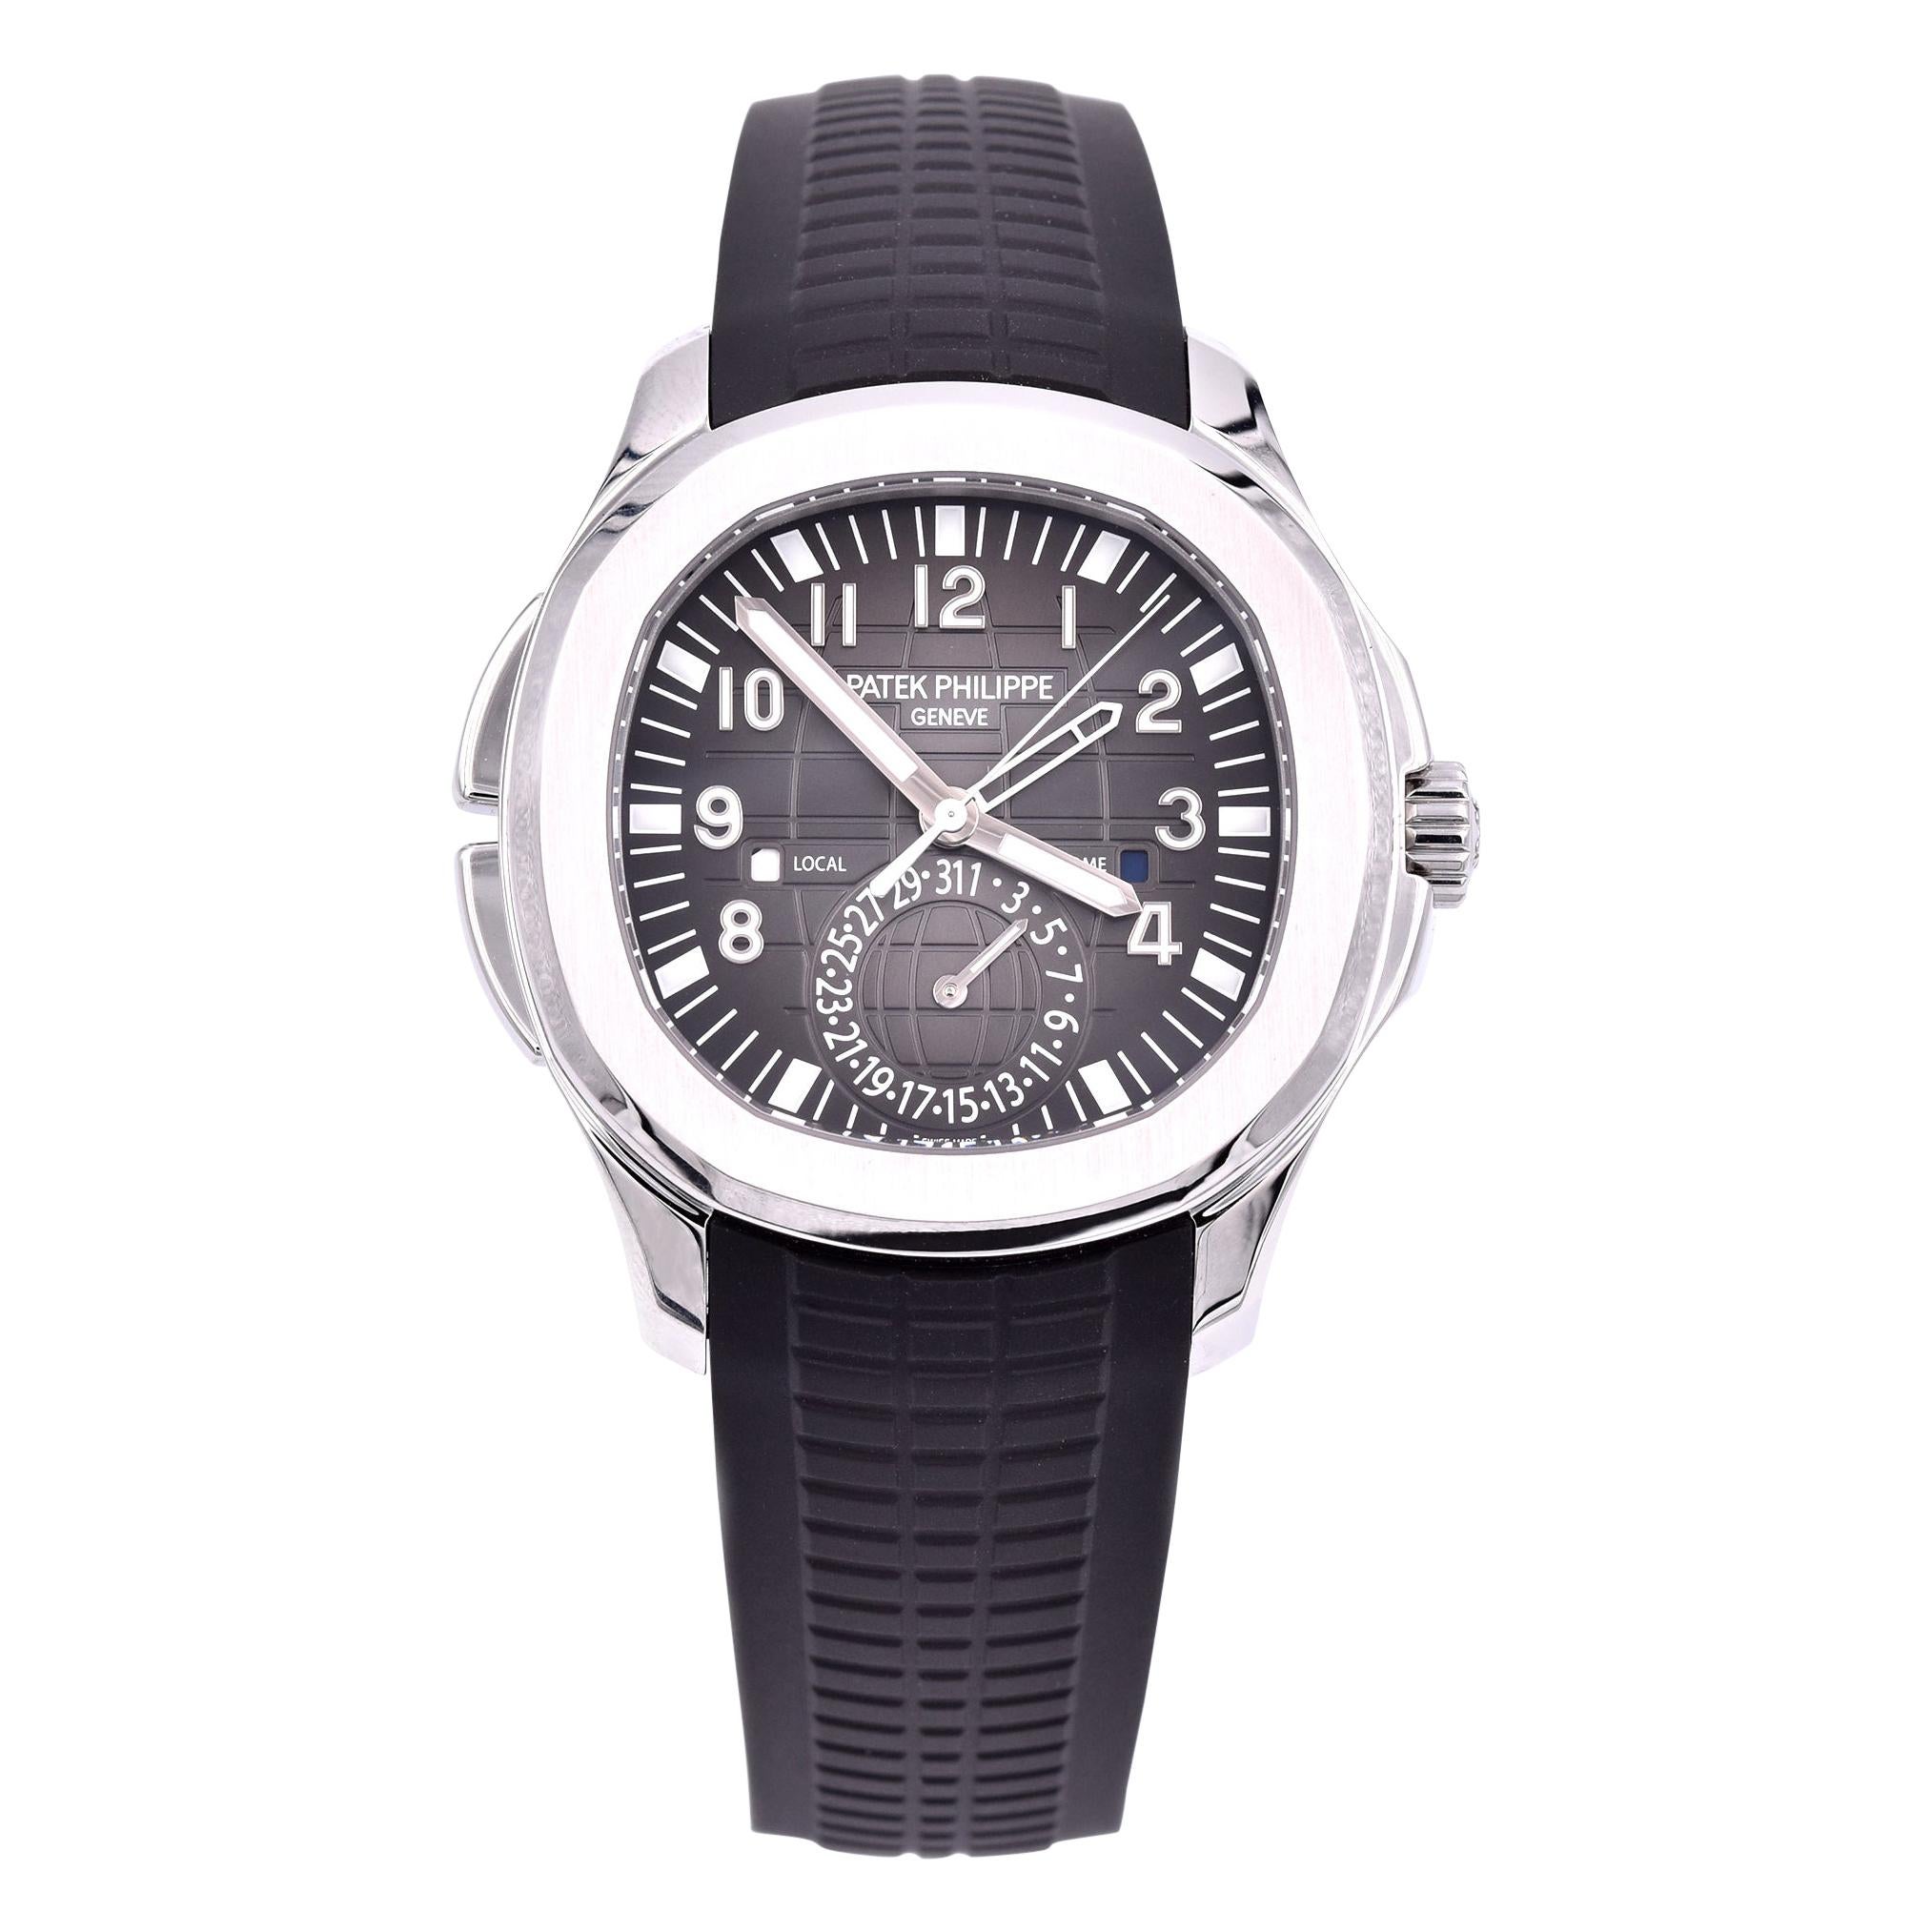 Patek Philippe Stainless Steel Aquanaut Watch Ref. 5164A